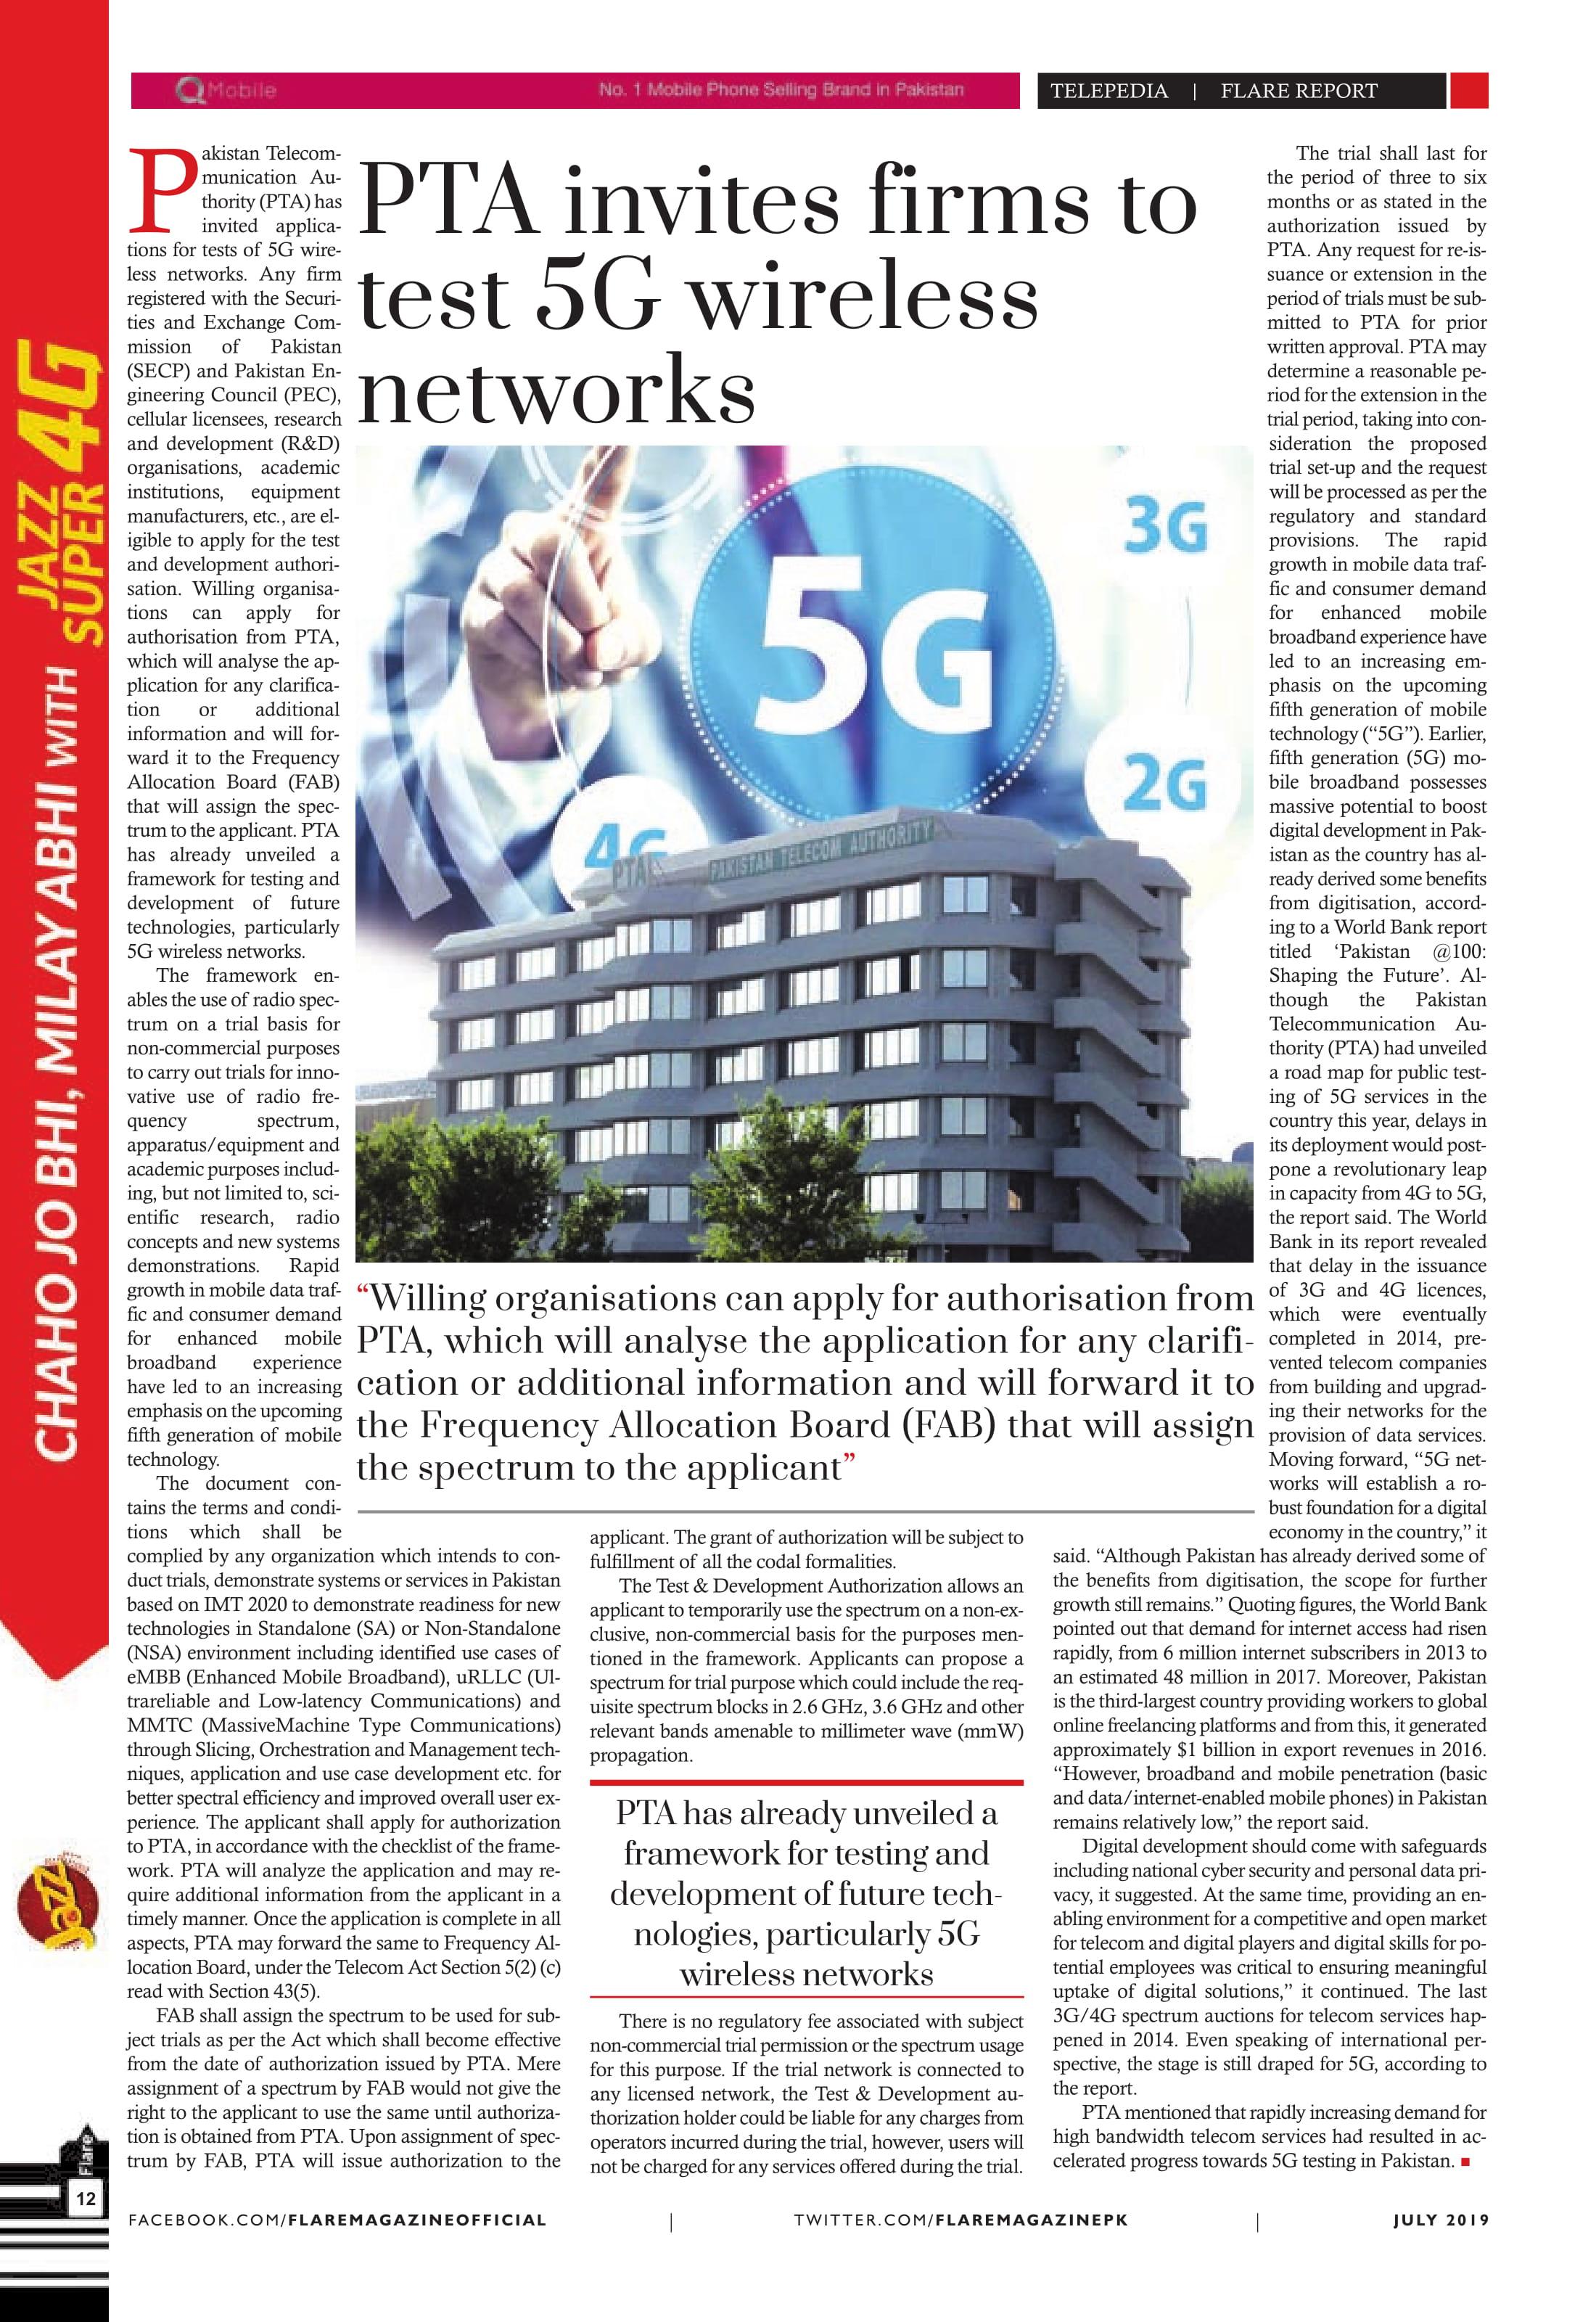 PTA invites firms to test 5G wireless Networks